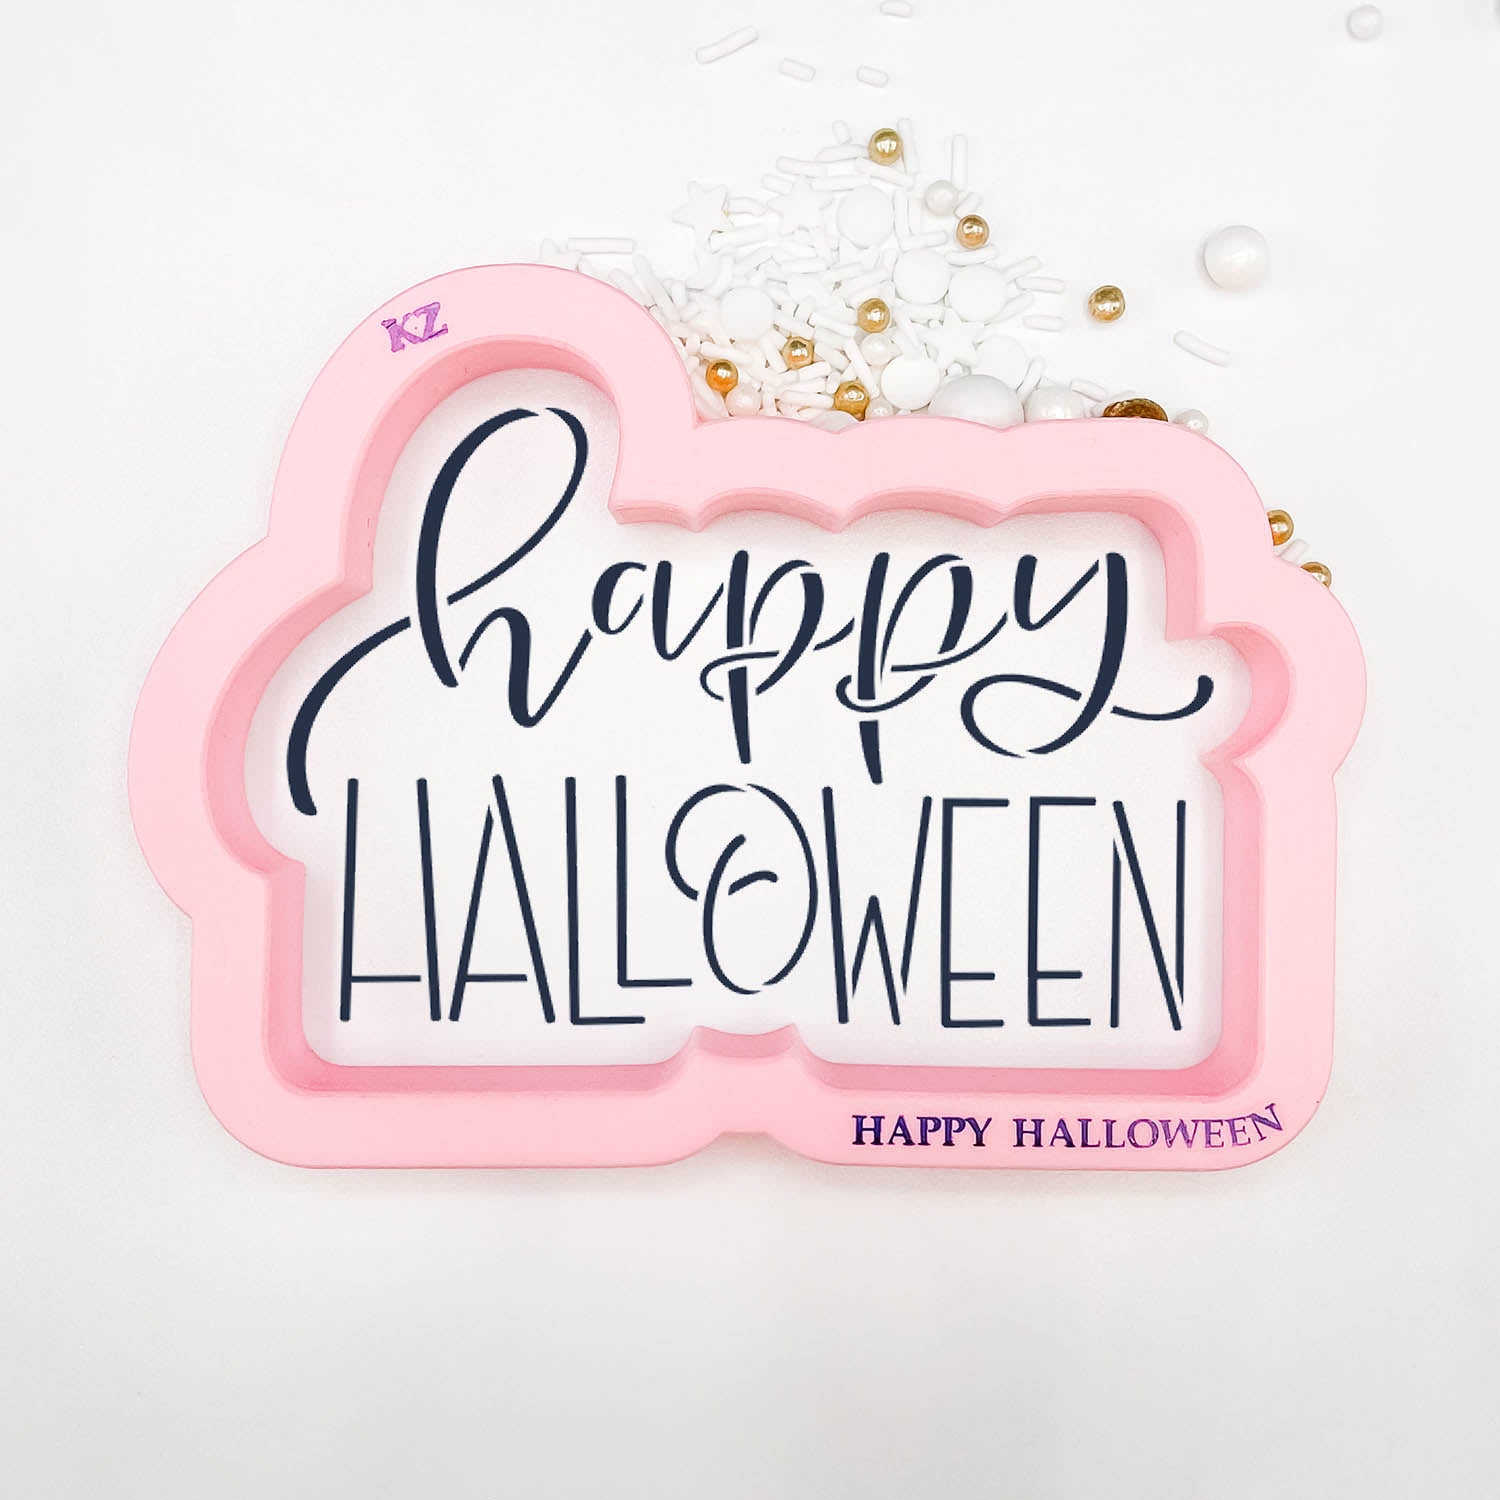 cookie cutter in the shape of the words "happy halloween"